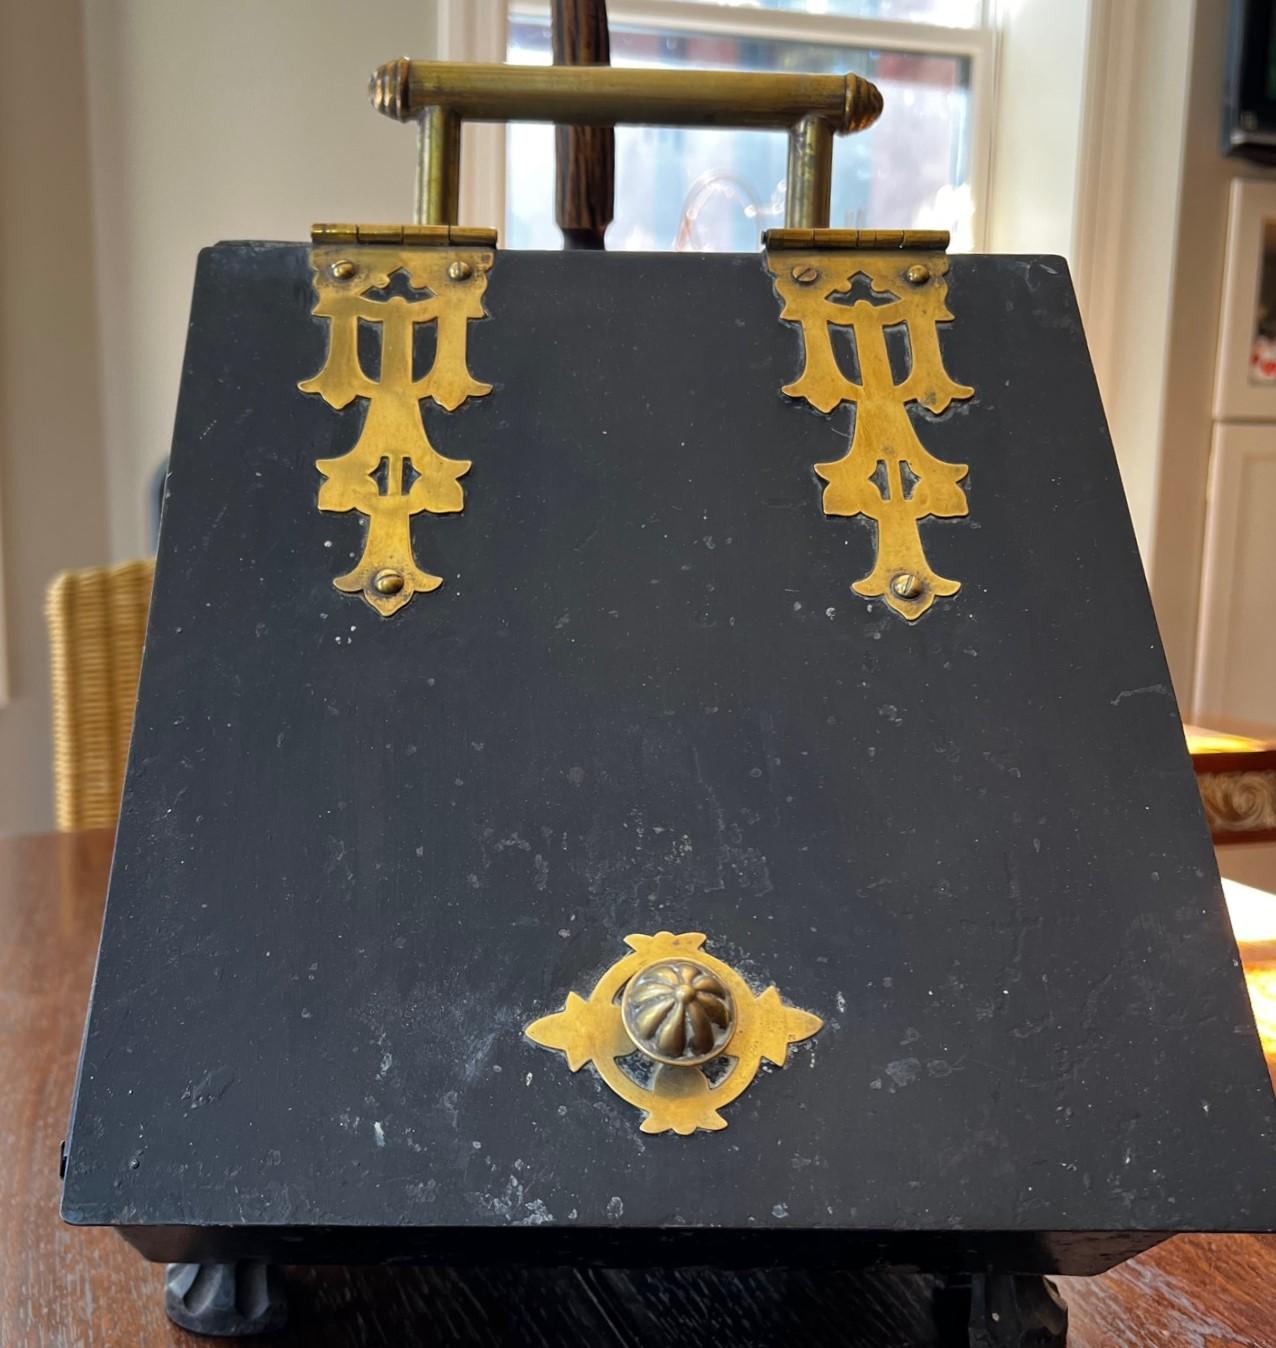 Antique Georgian English footed fireplace coal scuttle with shovel. The carrying handle at the pediment, the knob on the slant door and two elegant door hinges are all in polished brass. The lid opens to reveal a storage compartment for coal, The